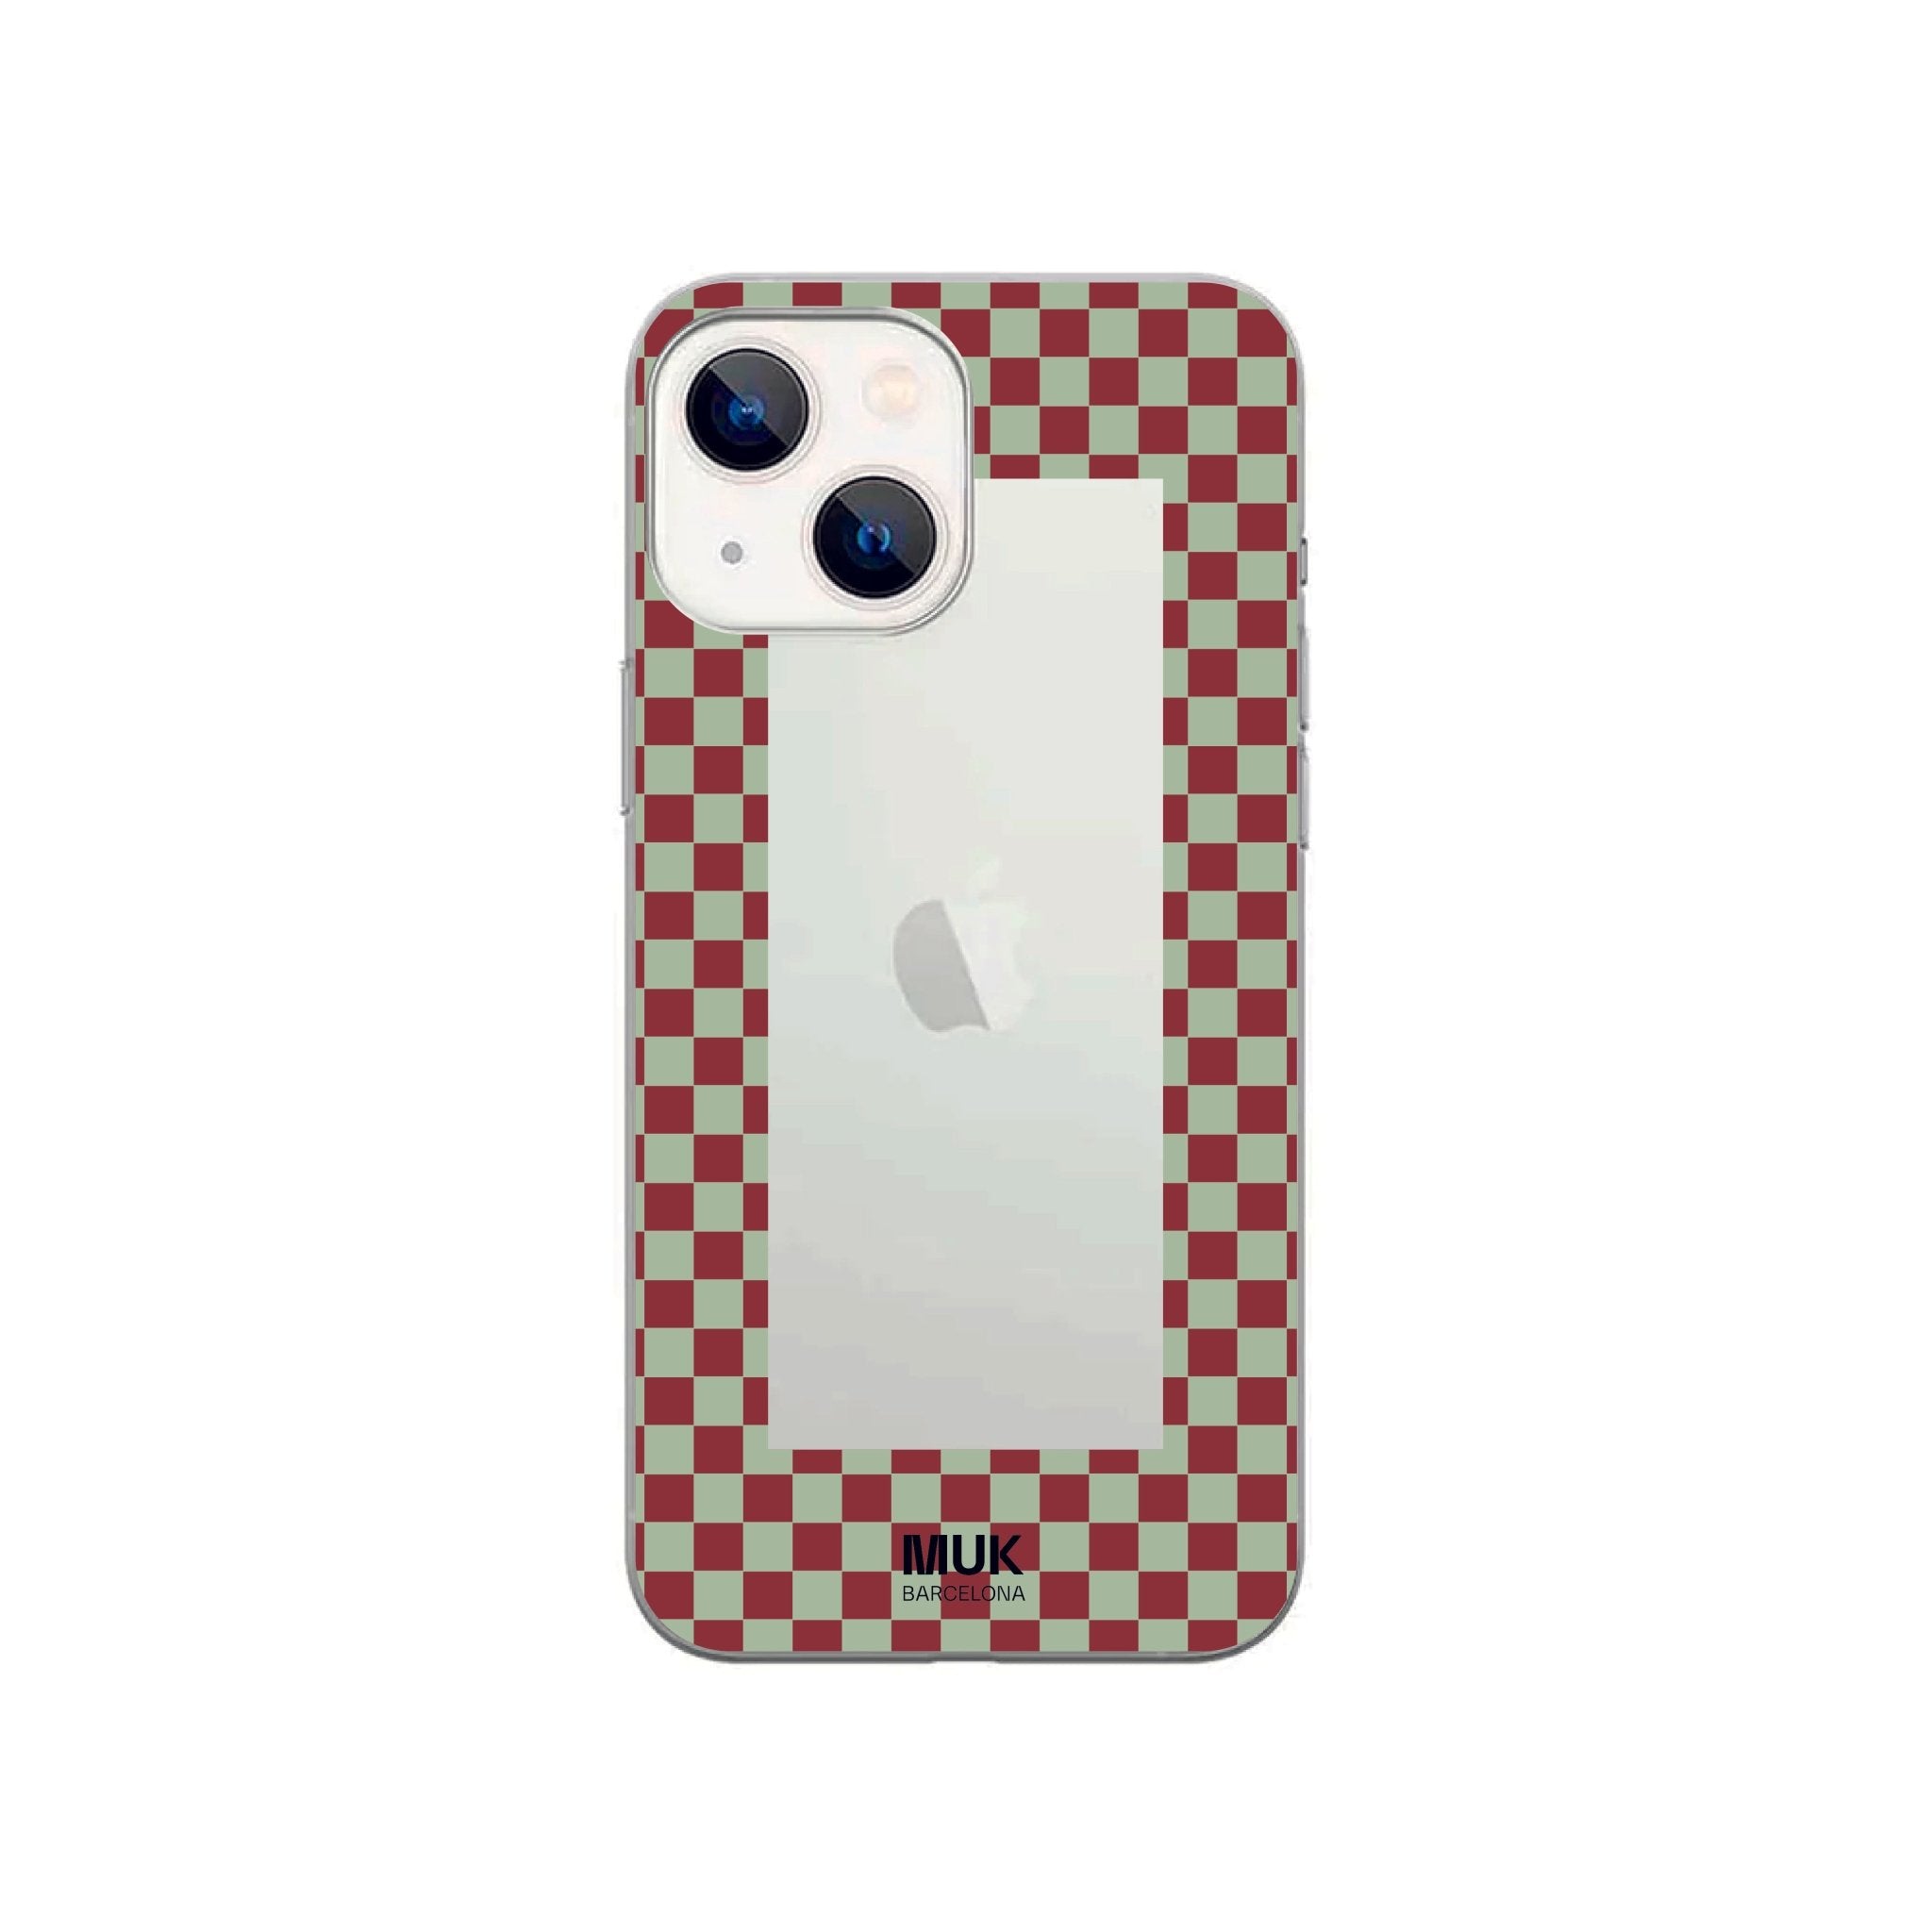 Clear Phone case with a pattern on it
